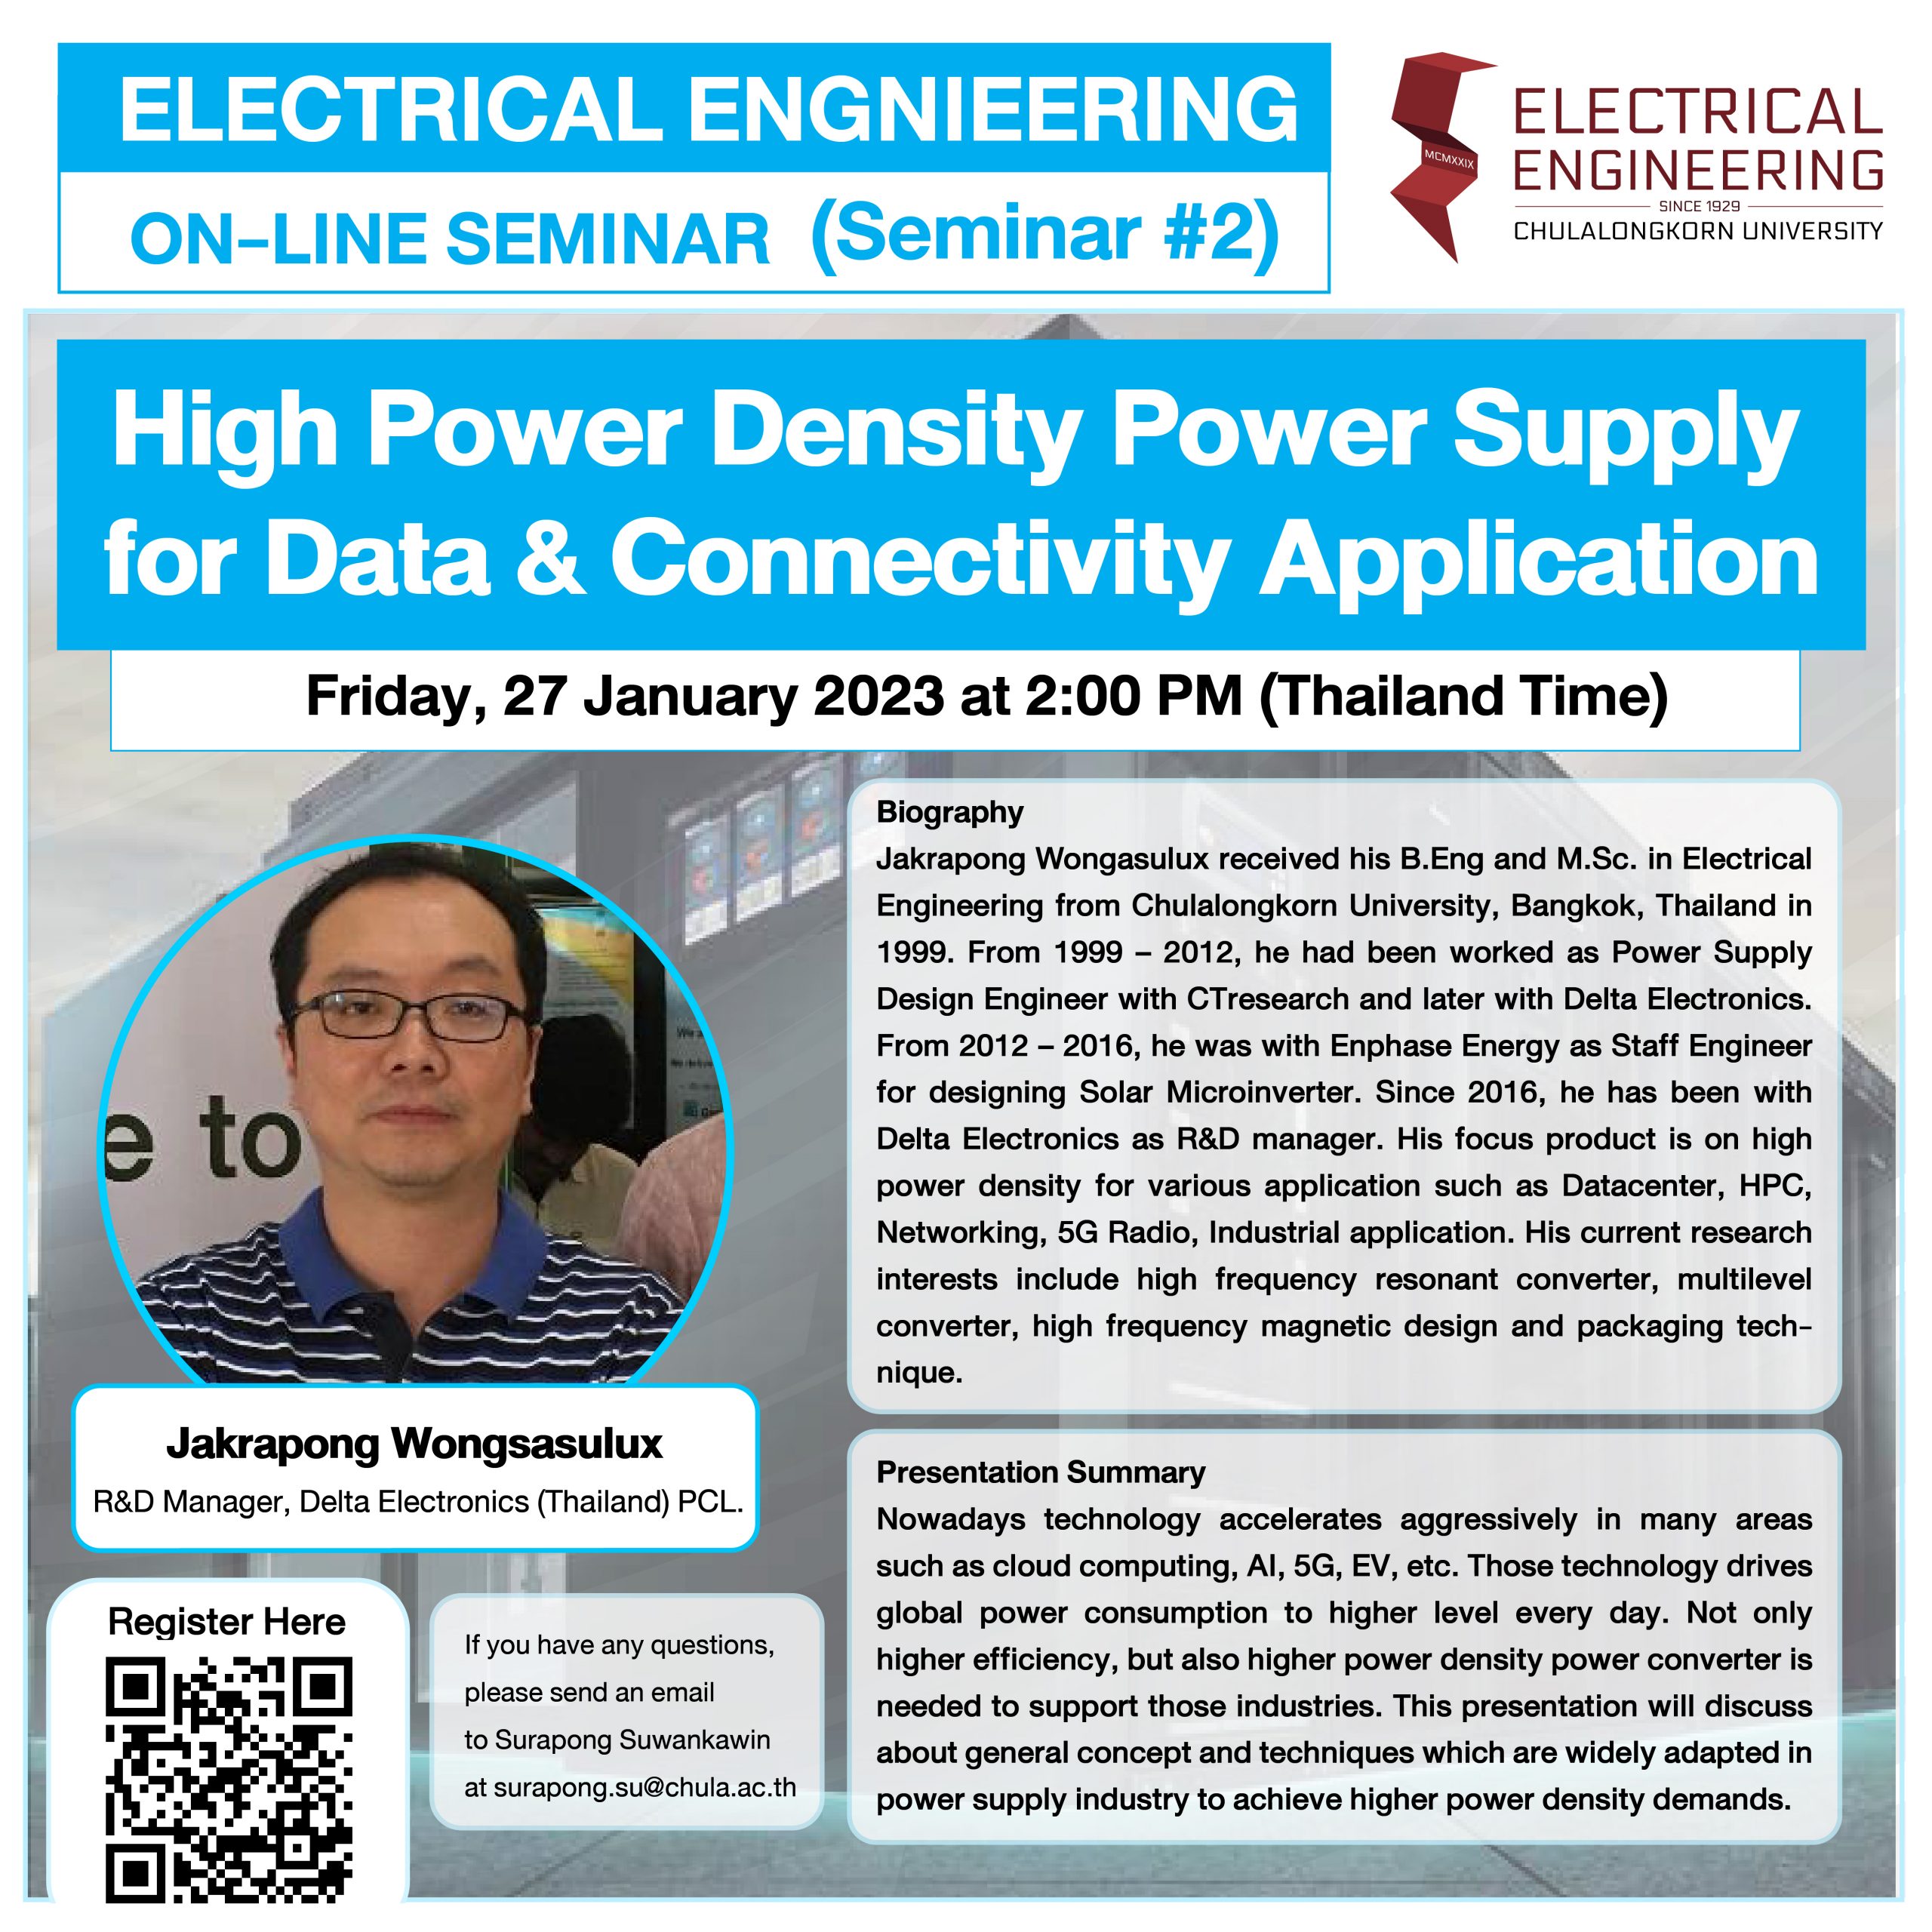 ELECTRICAL ENGNIEERING ON-LINE SEMINAR (Seminar #2) "High Power Density Power Supply for Data & Connectivity Application"